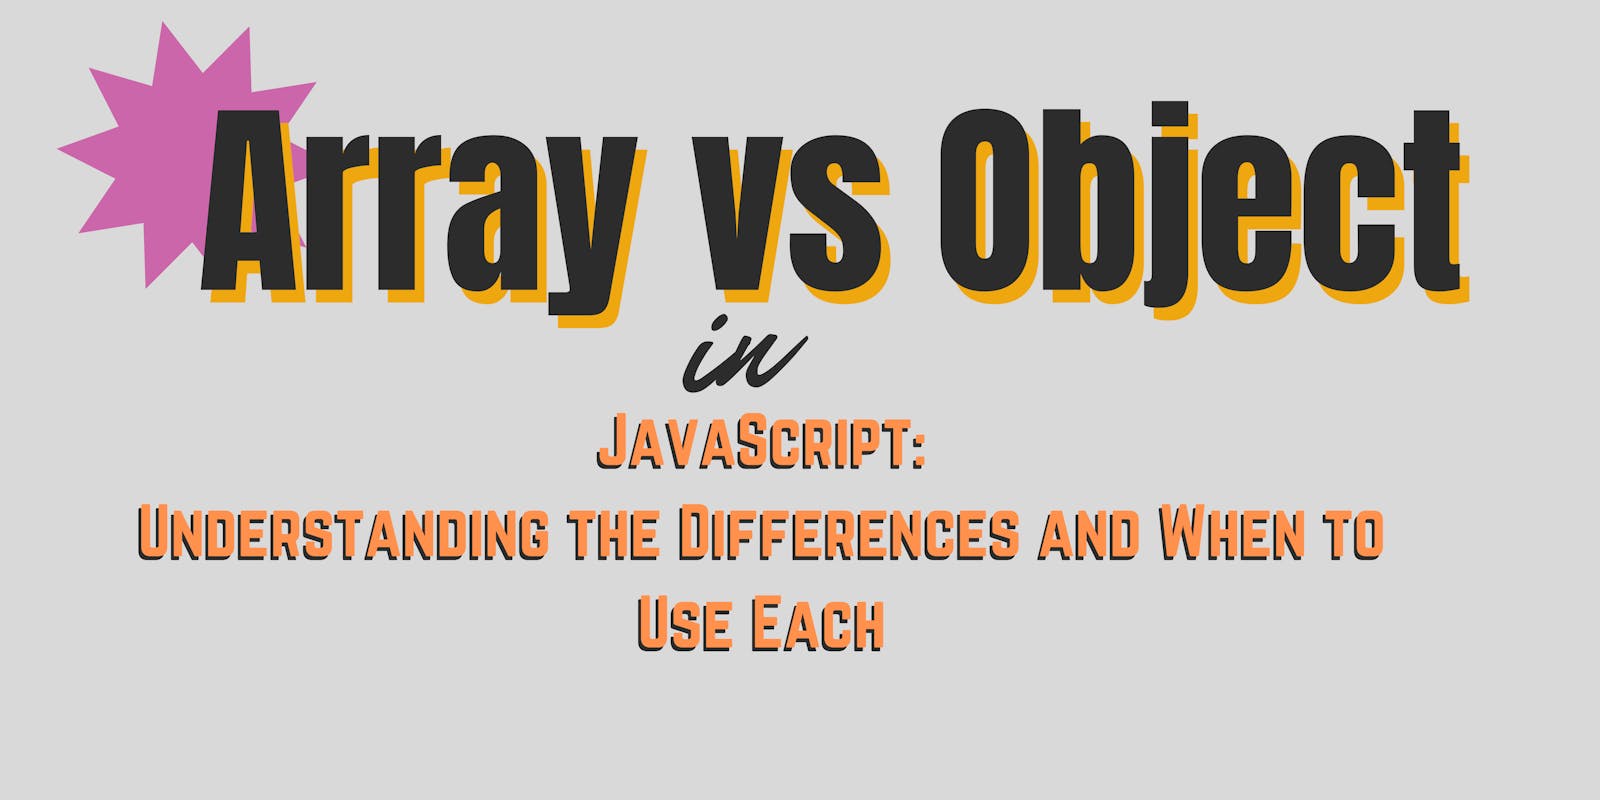 "Array vs Object in JavaScript: Understanding the Differences and When to Use Each ”